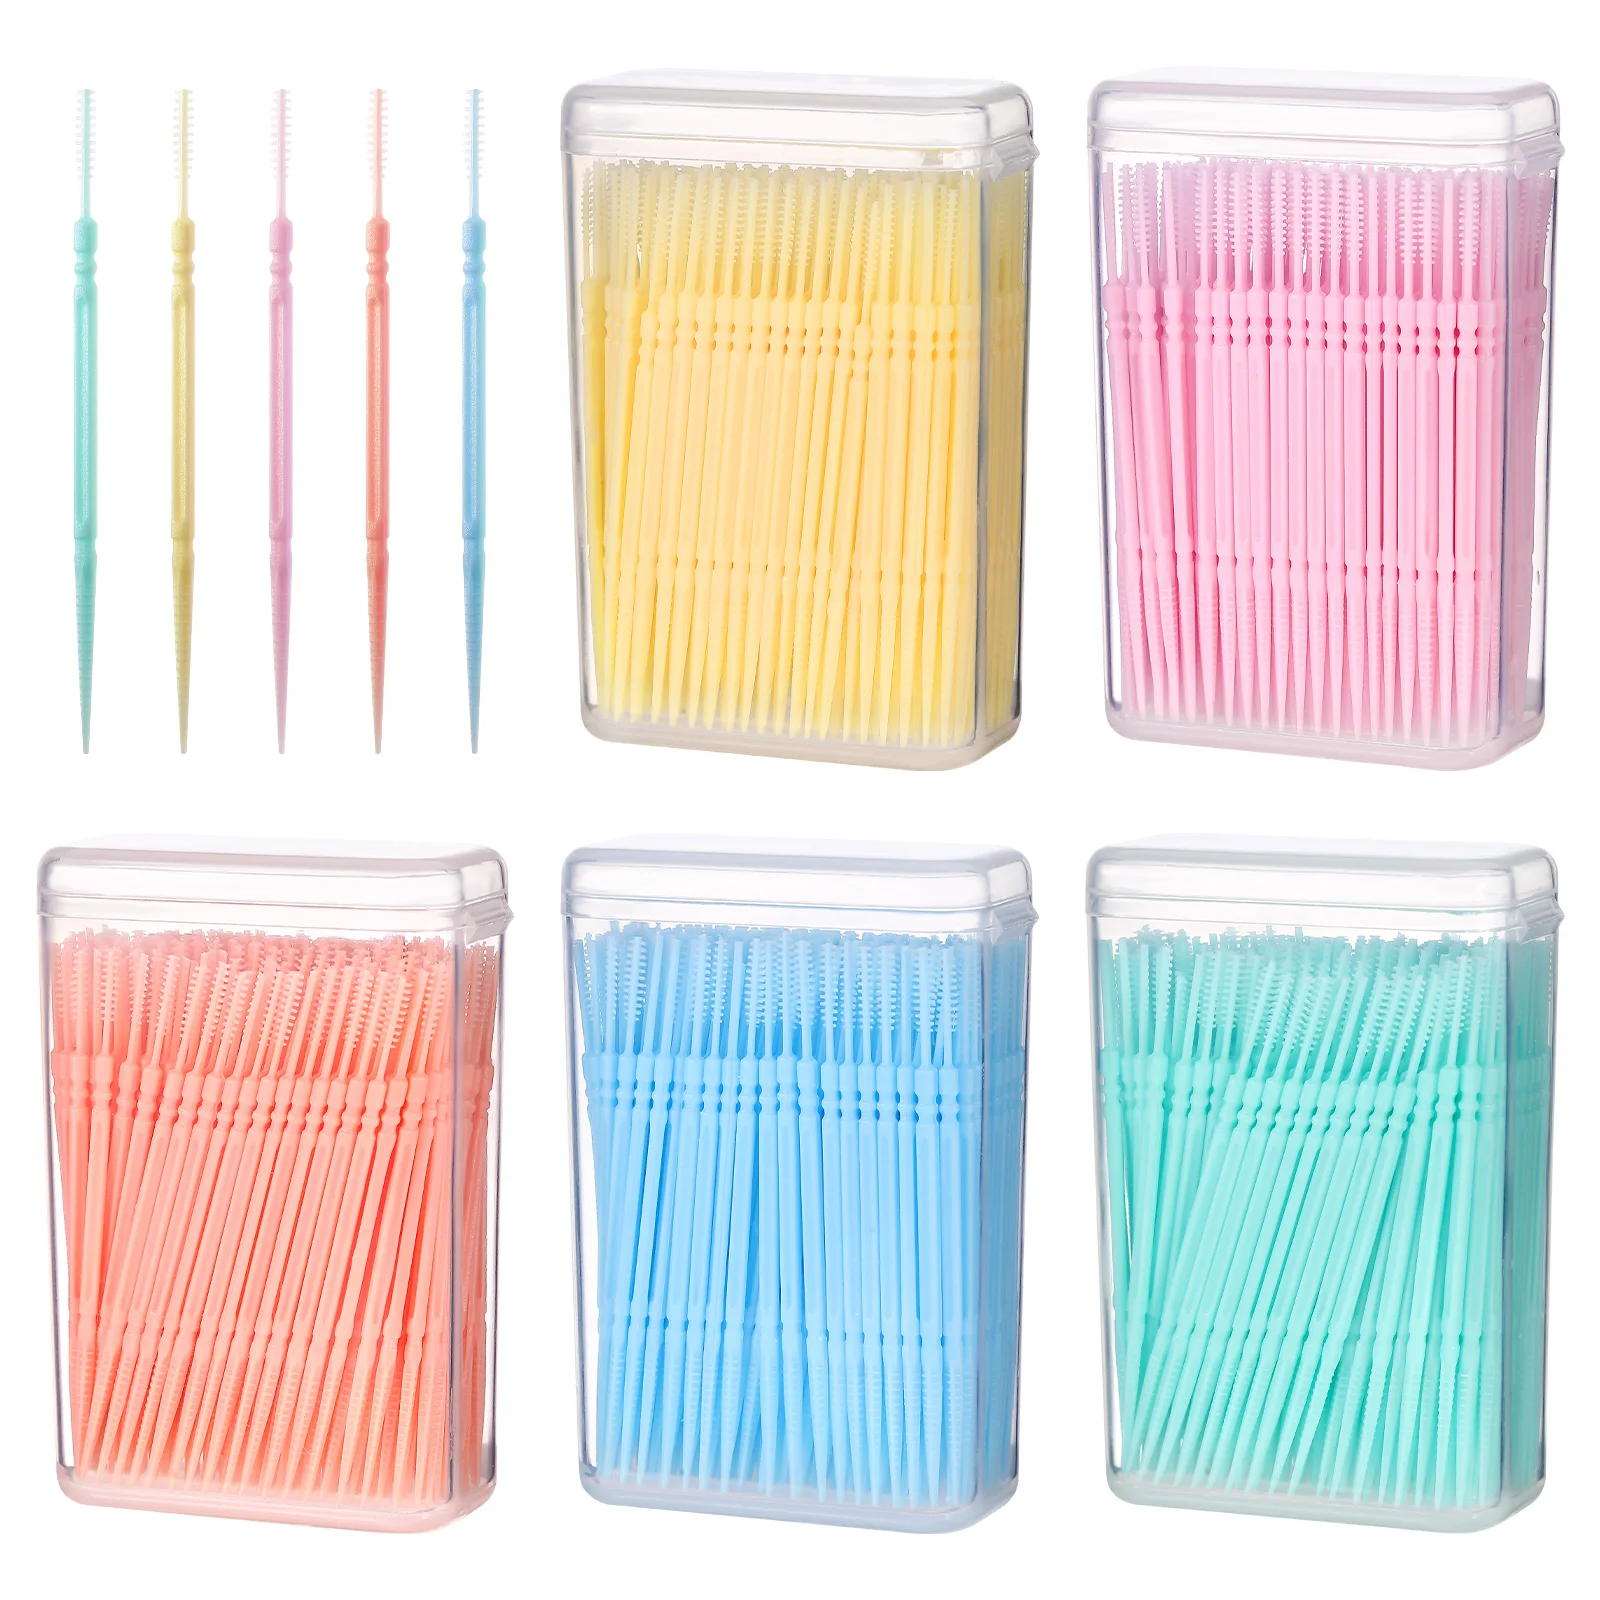 

1100pcs Disposable Plastic Toothpick Double-head Oral Care Interdental Floss Cleaners plastic toothpick thread(Random Color)